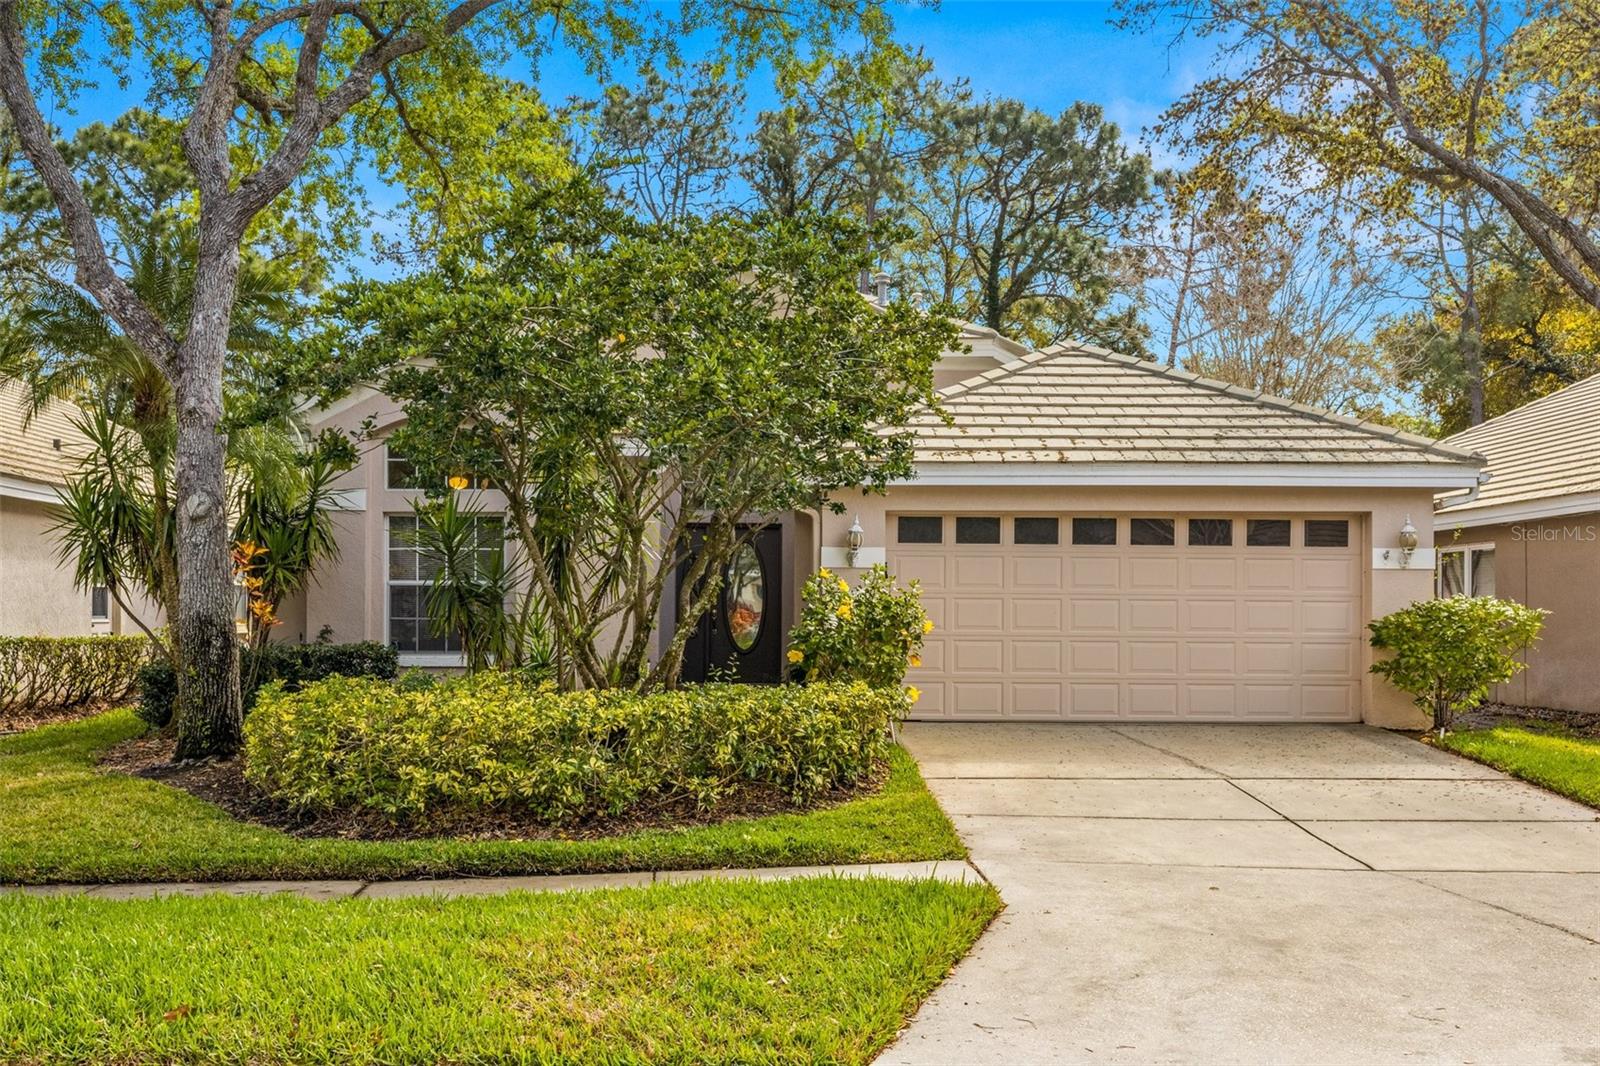 Details for 17618 Nathans Drive, TAMPA, FL 33647